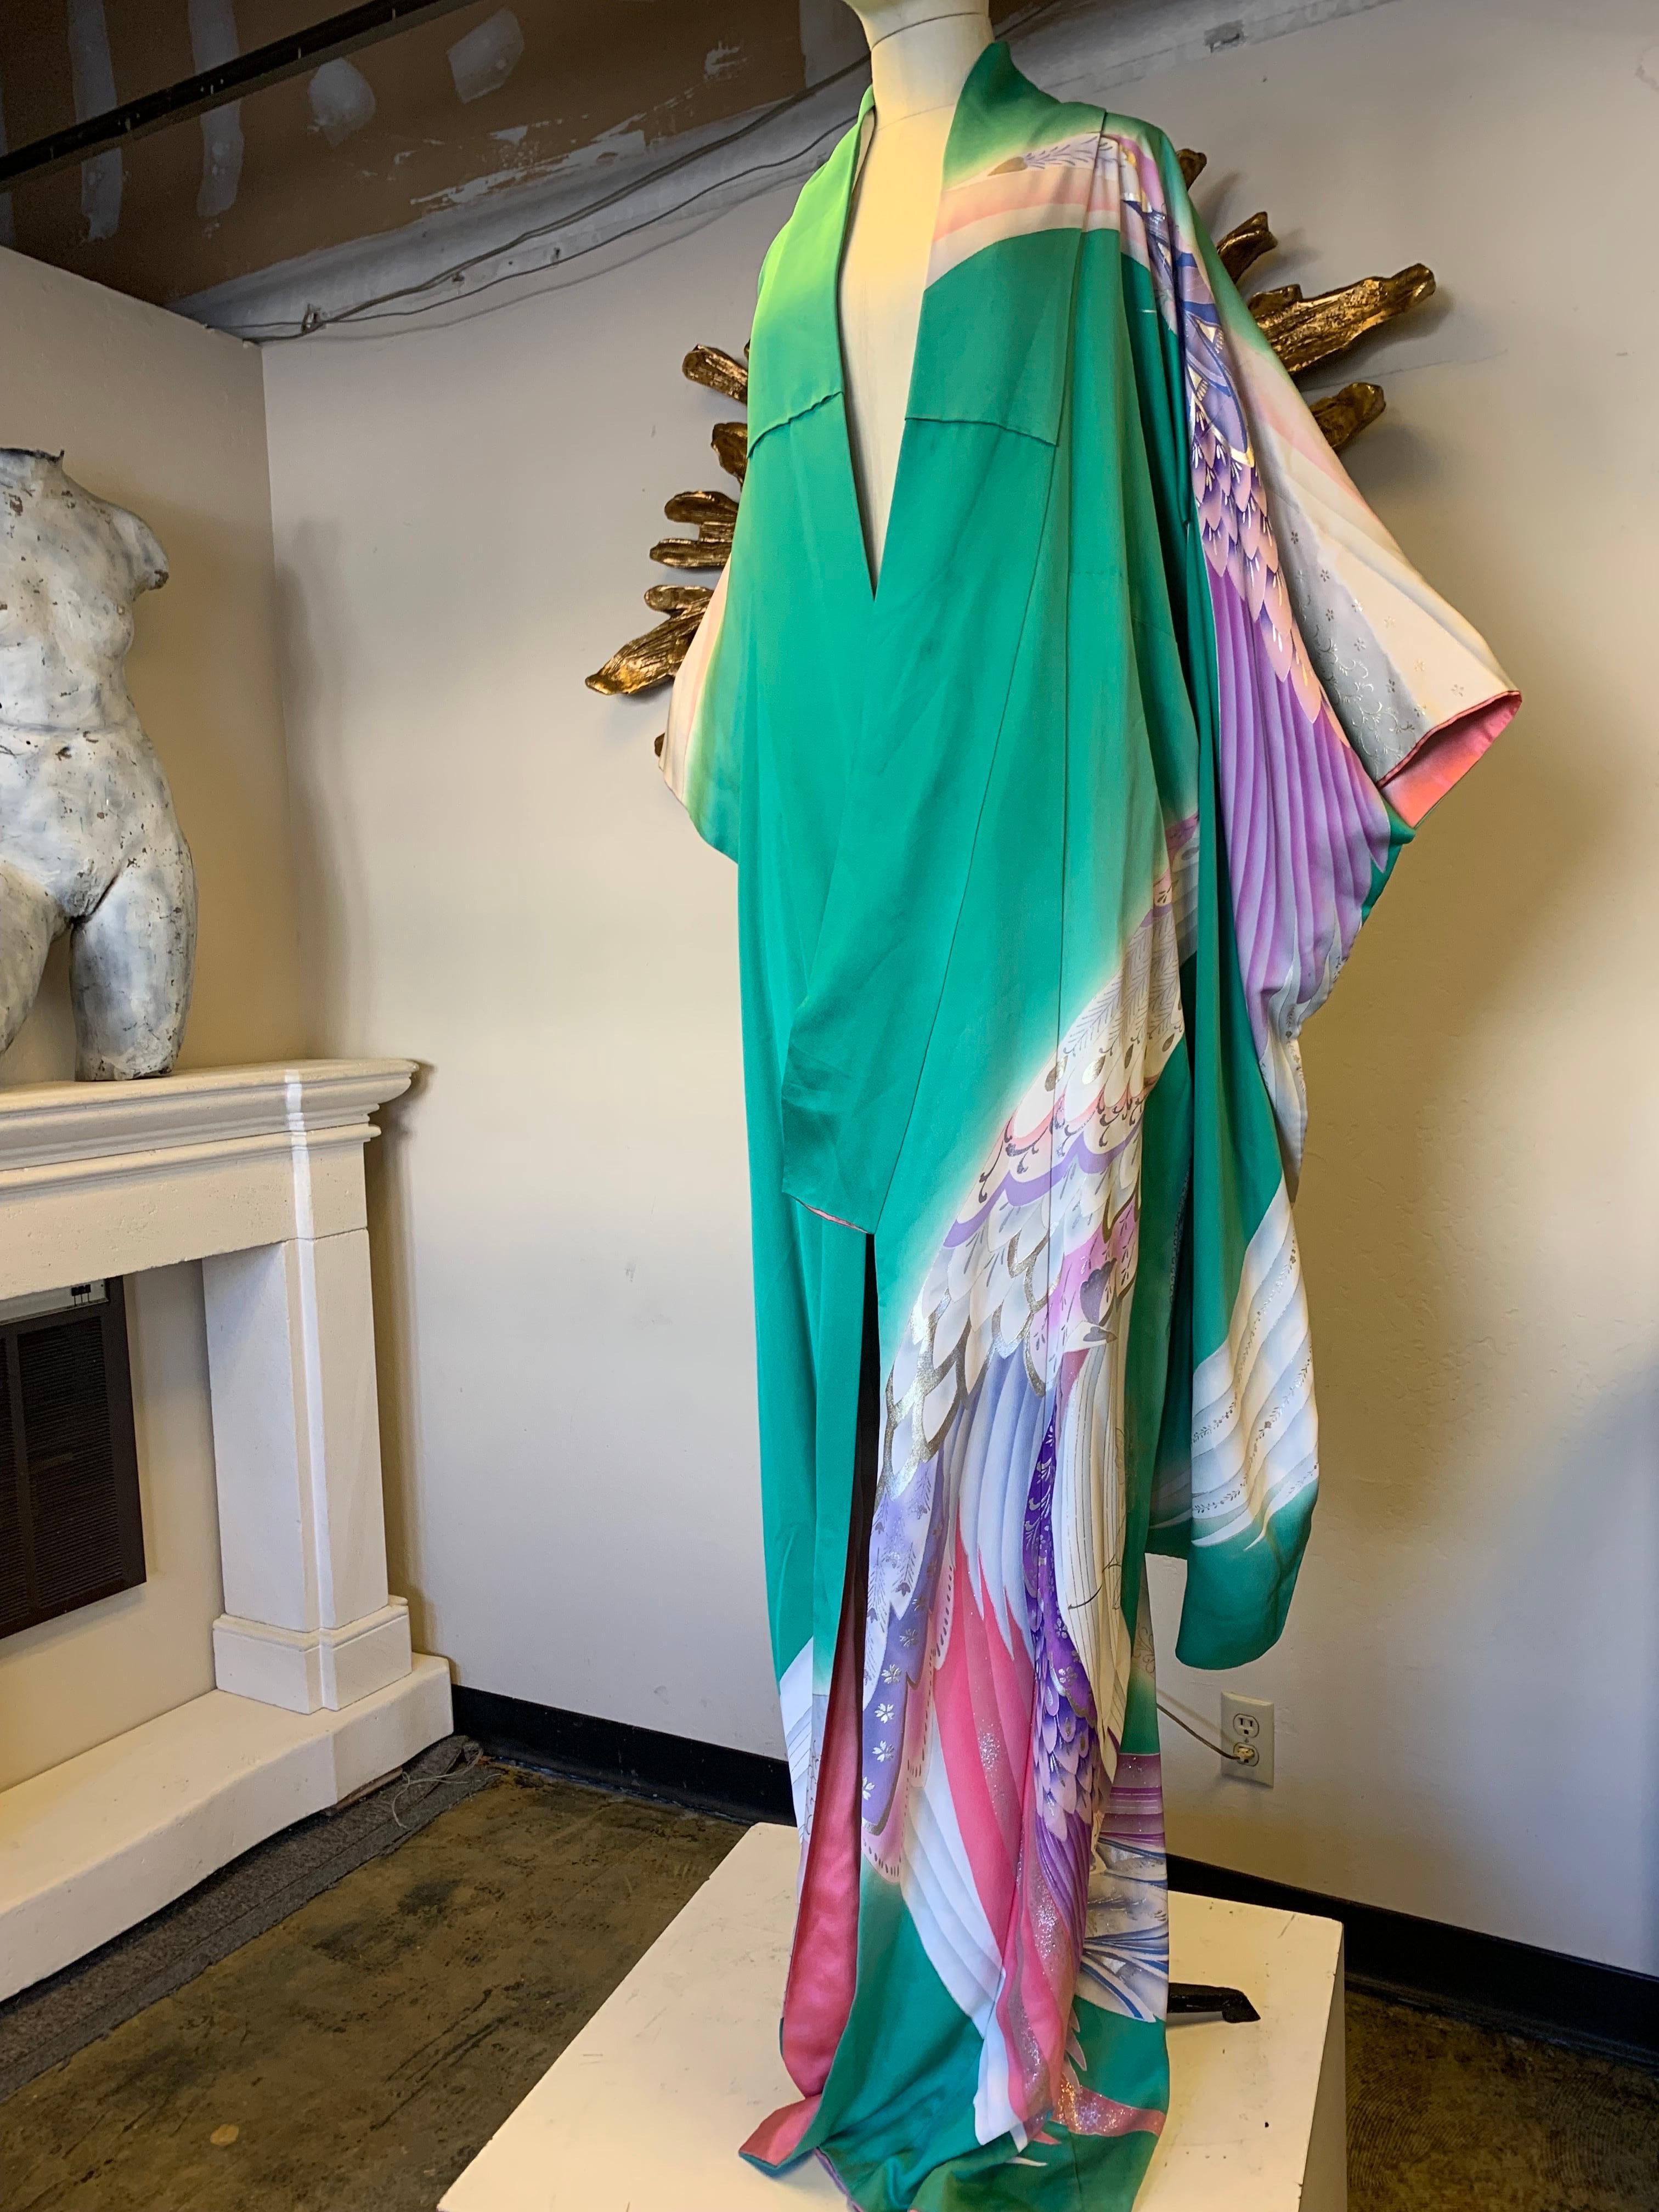 Vintage Kimono: Jade green silk, traditionally cut (draped in photo to show pattern) with dramatic airbrushed lavender, pink and silver metallic wing motifs. Gorgeous! Size up to Large.